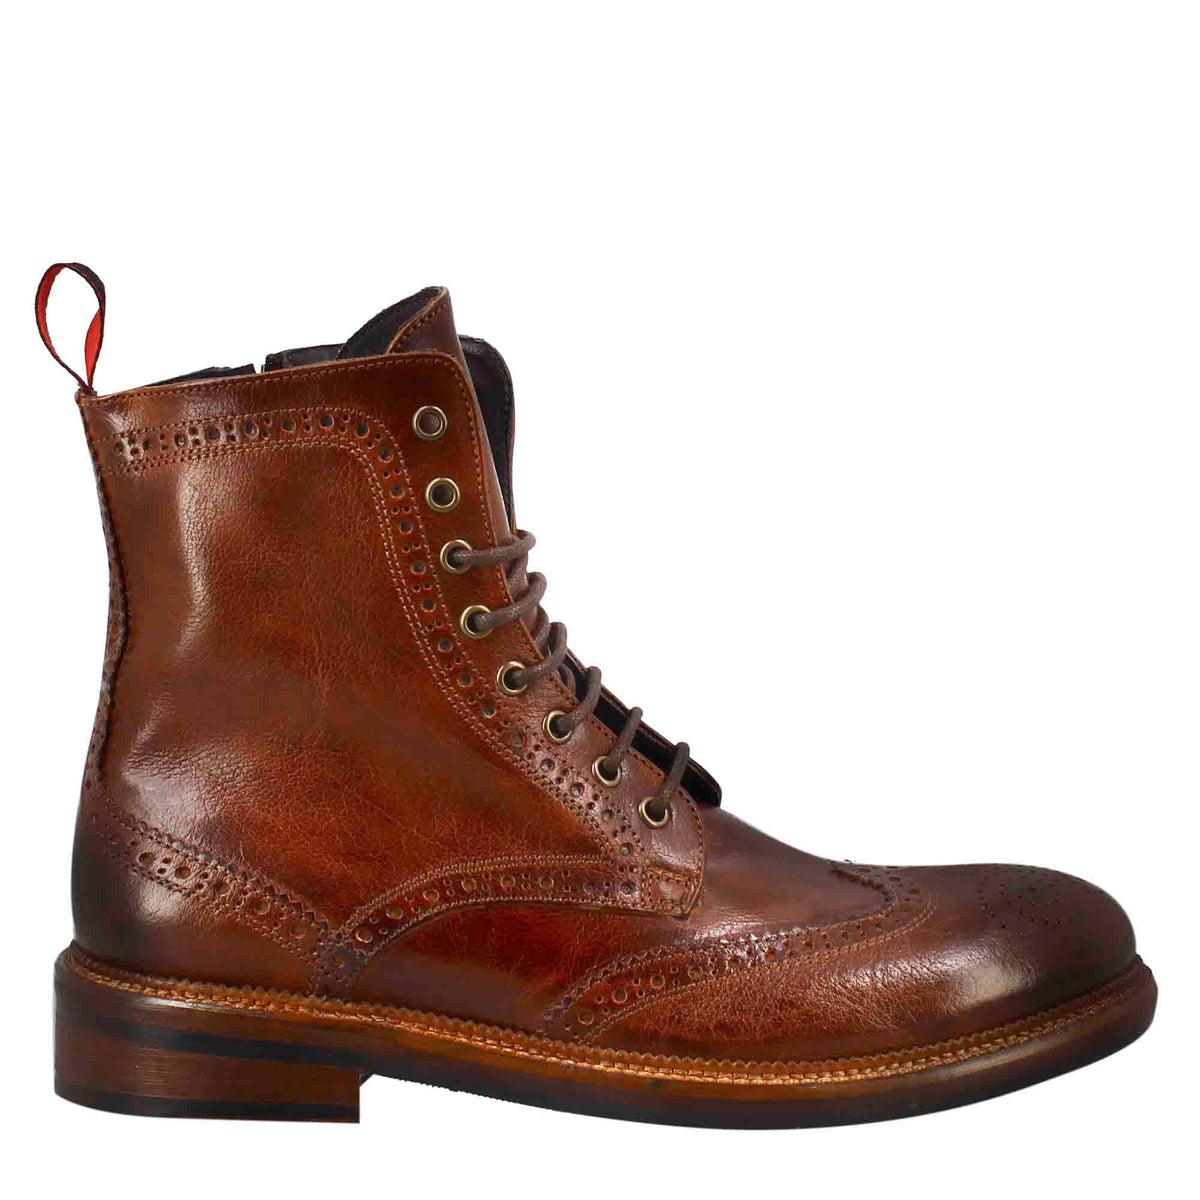 Candy amphibians for men in washed leather in dark tan colour